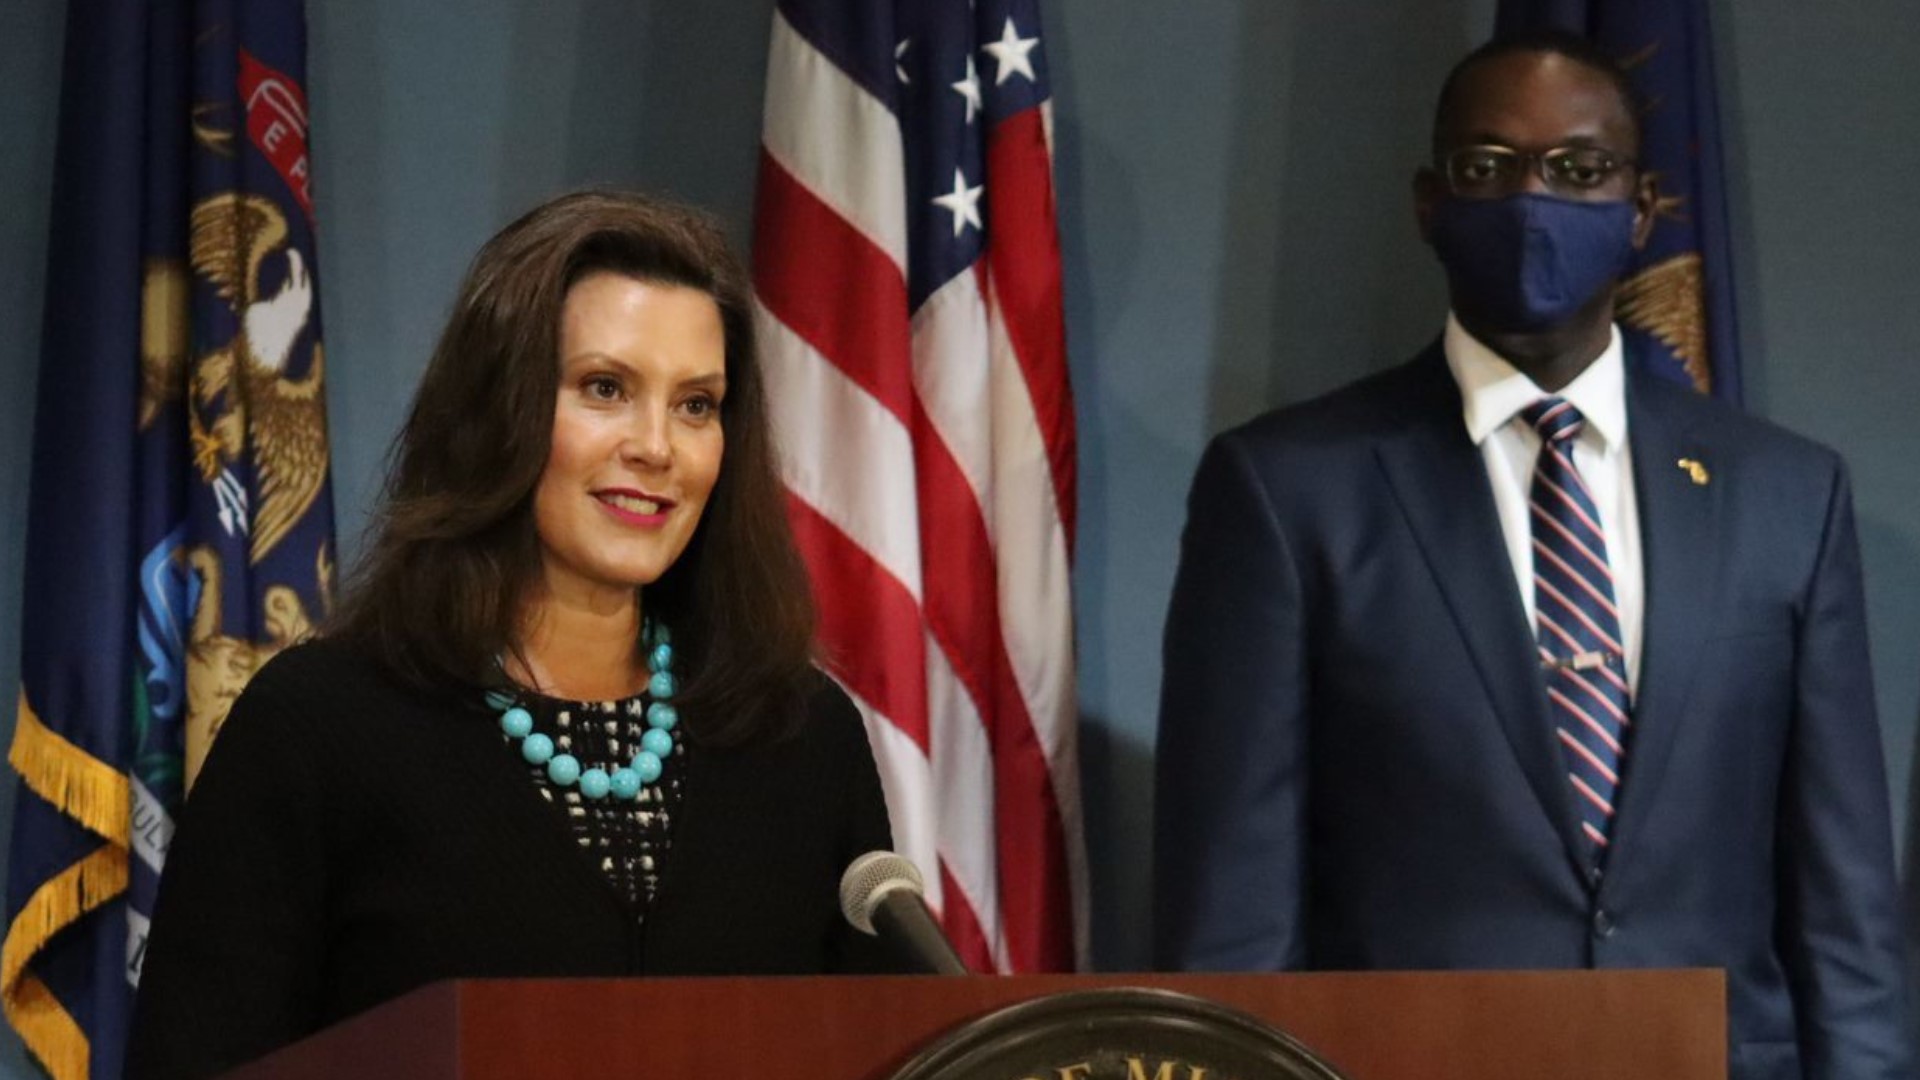 Gov. Gretchen Whitmer annouced a program offering tuition-free college to essential, frontline Michiganders who worked during to the pandemic.